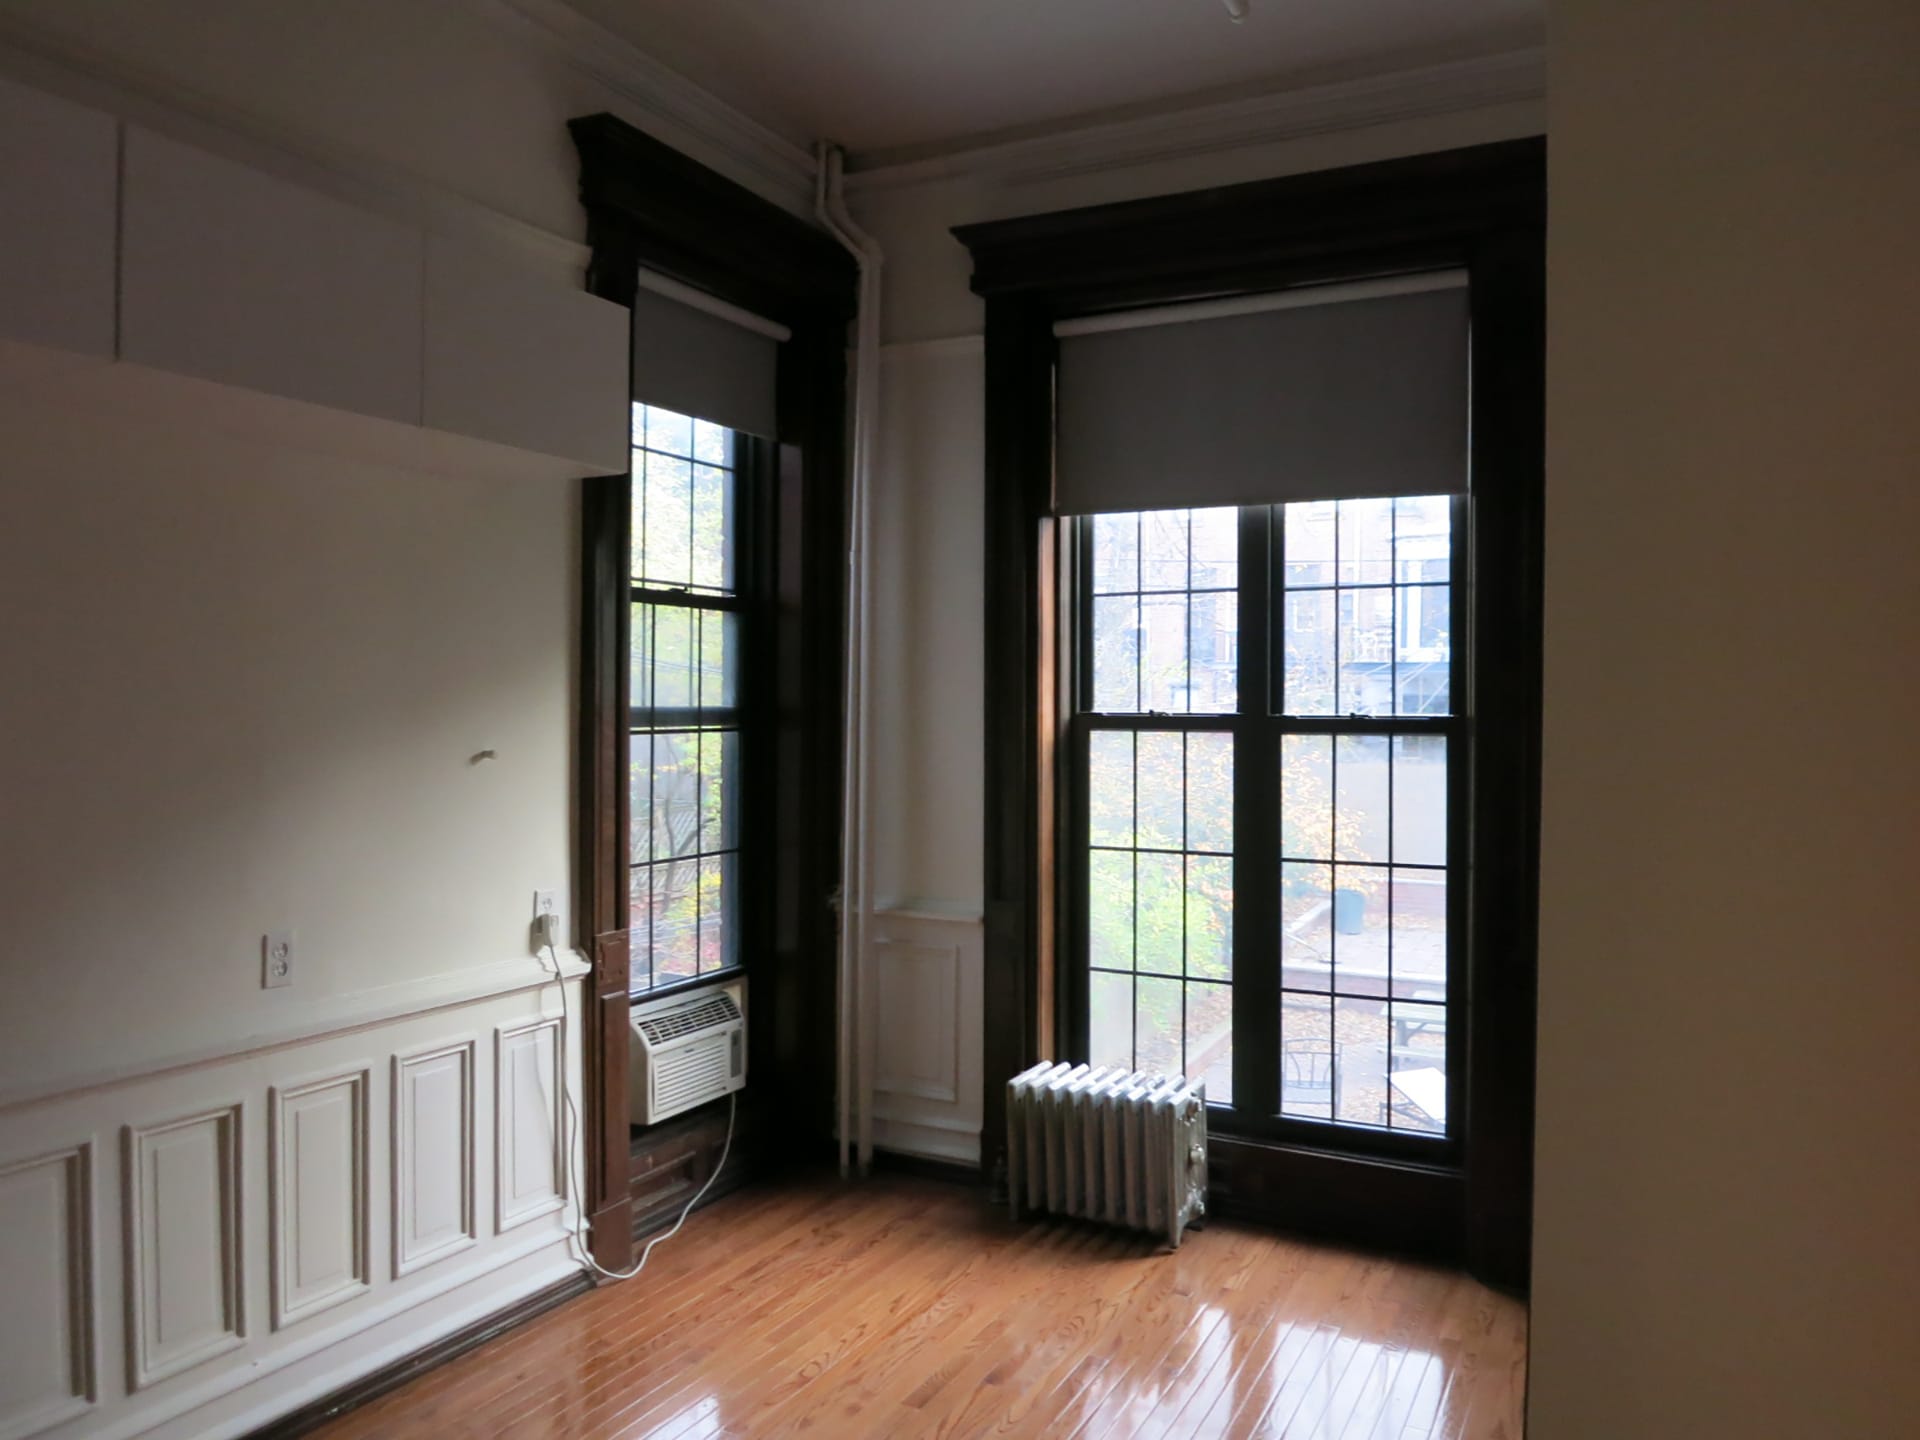 Narrow rear extension in a Park Slope home before our renovation